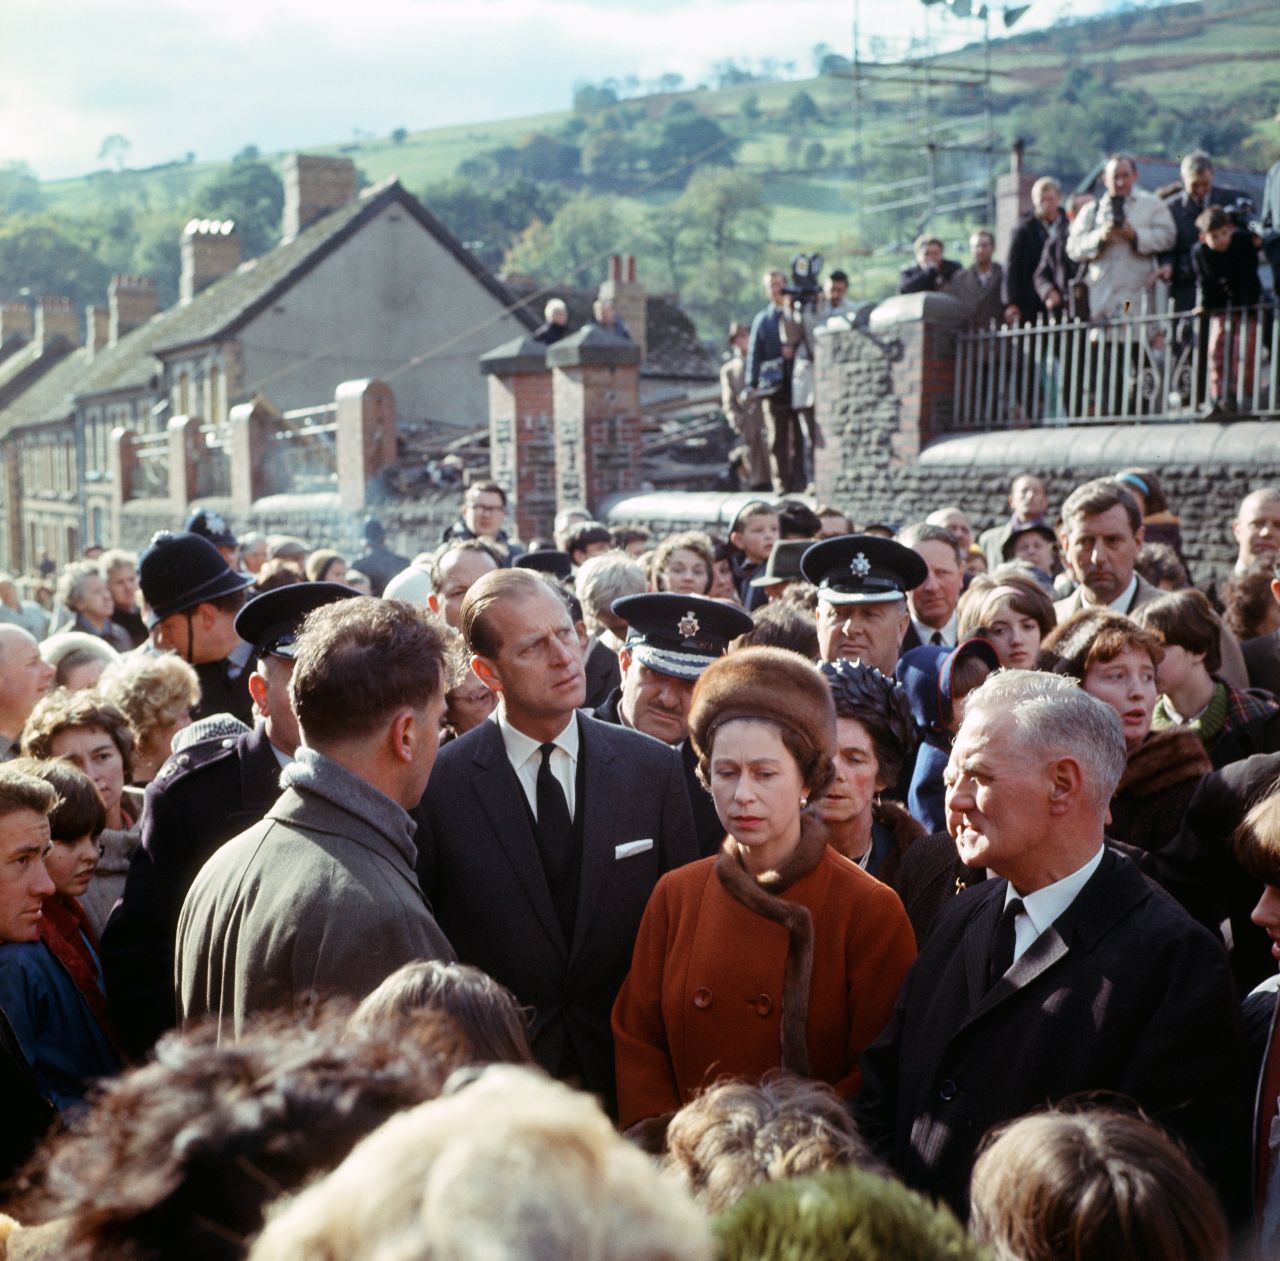 The Queen and Prince Philip visiting Aberfan, 29th October 1966.